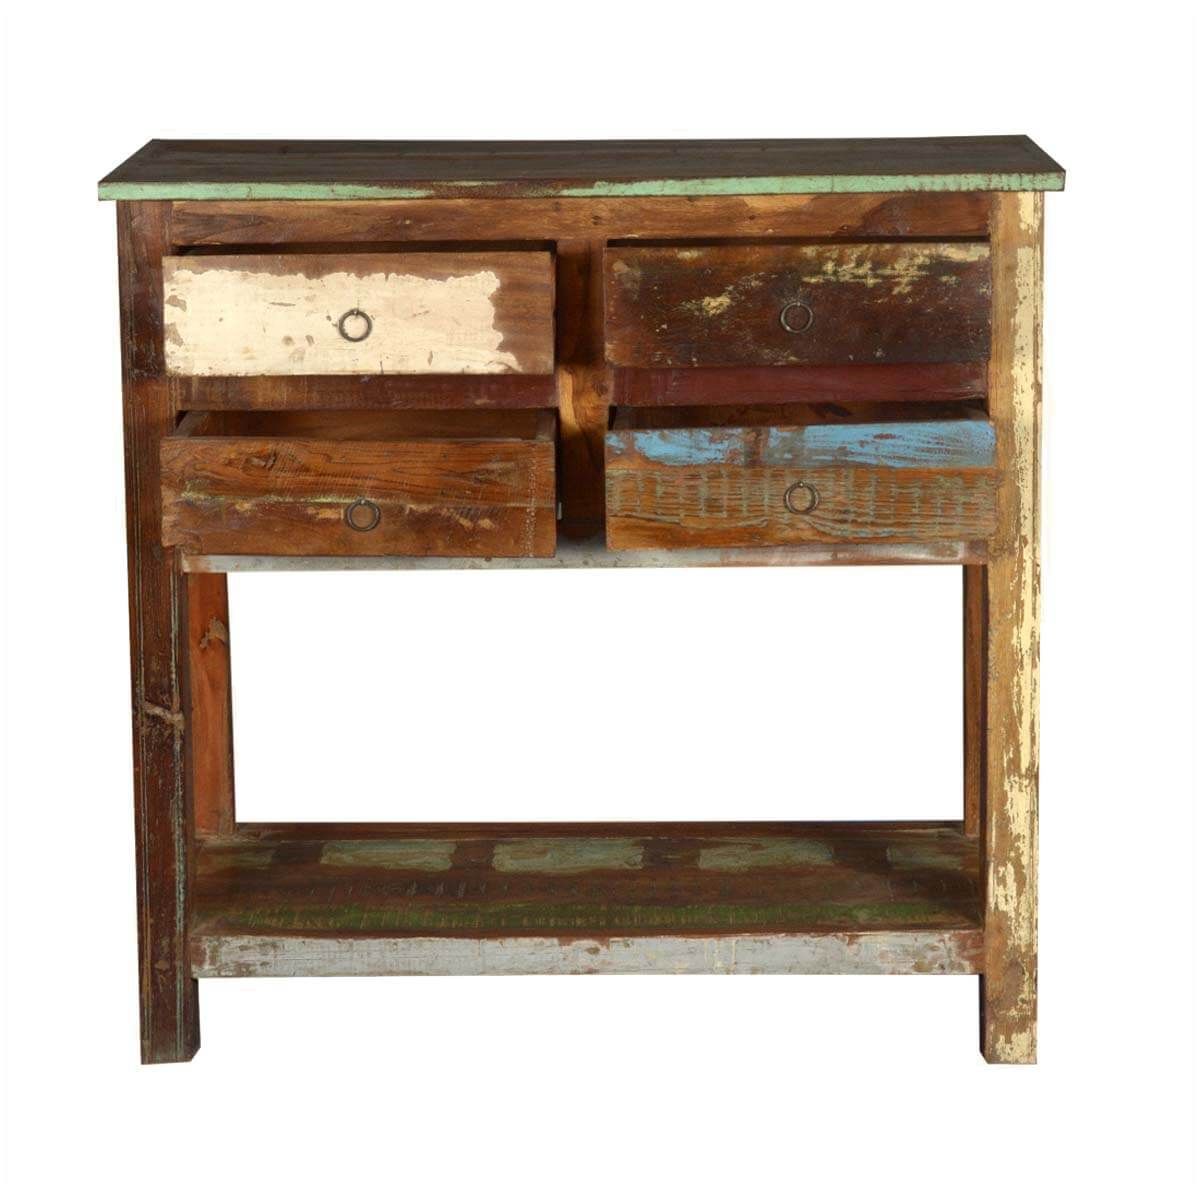 2 Tier Reclaimed Wood Console Table With 4 Drawers Throughout Reclaimed Wood Console Tables (View 18 of 20)